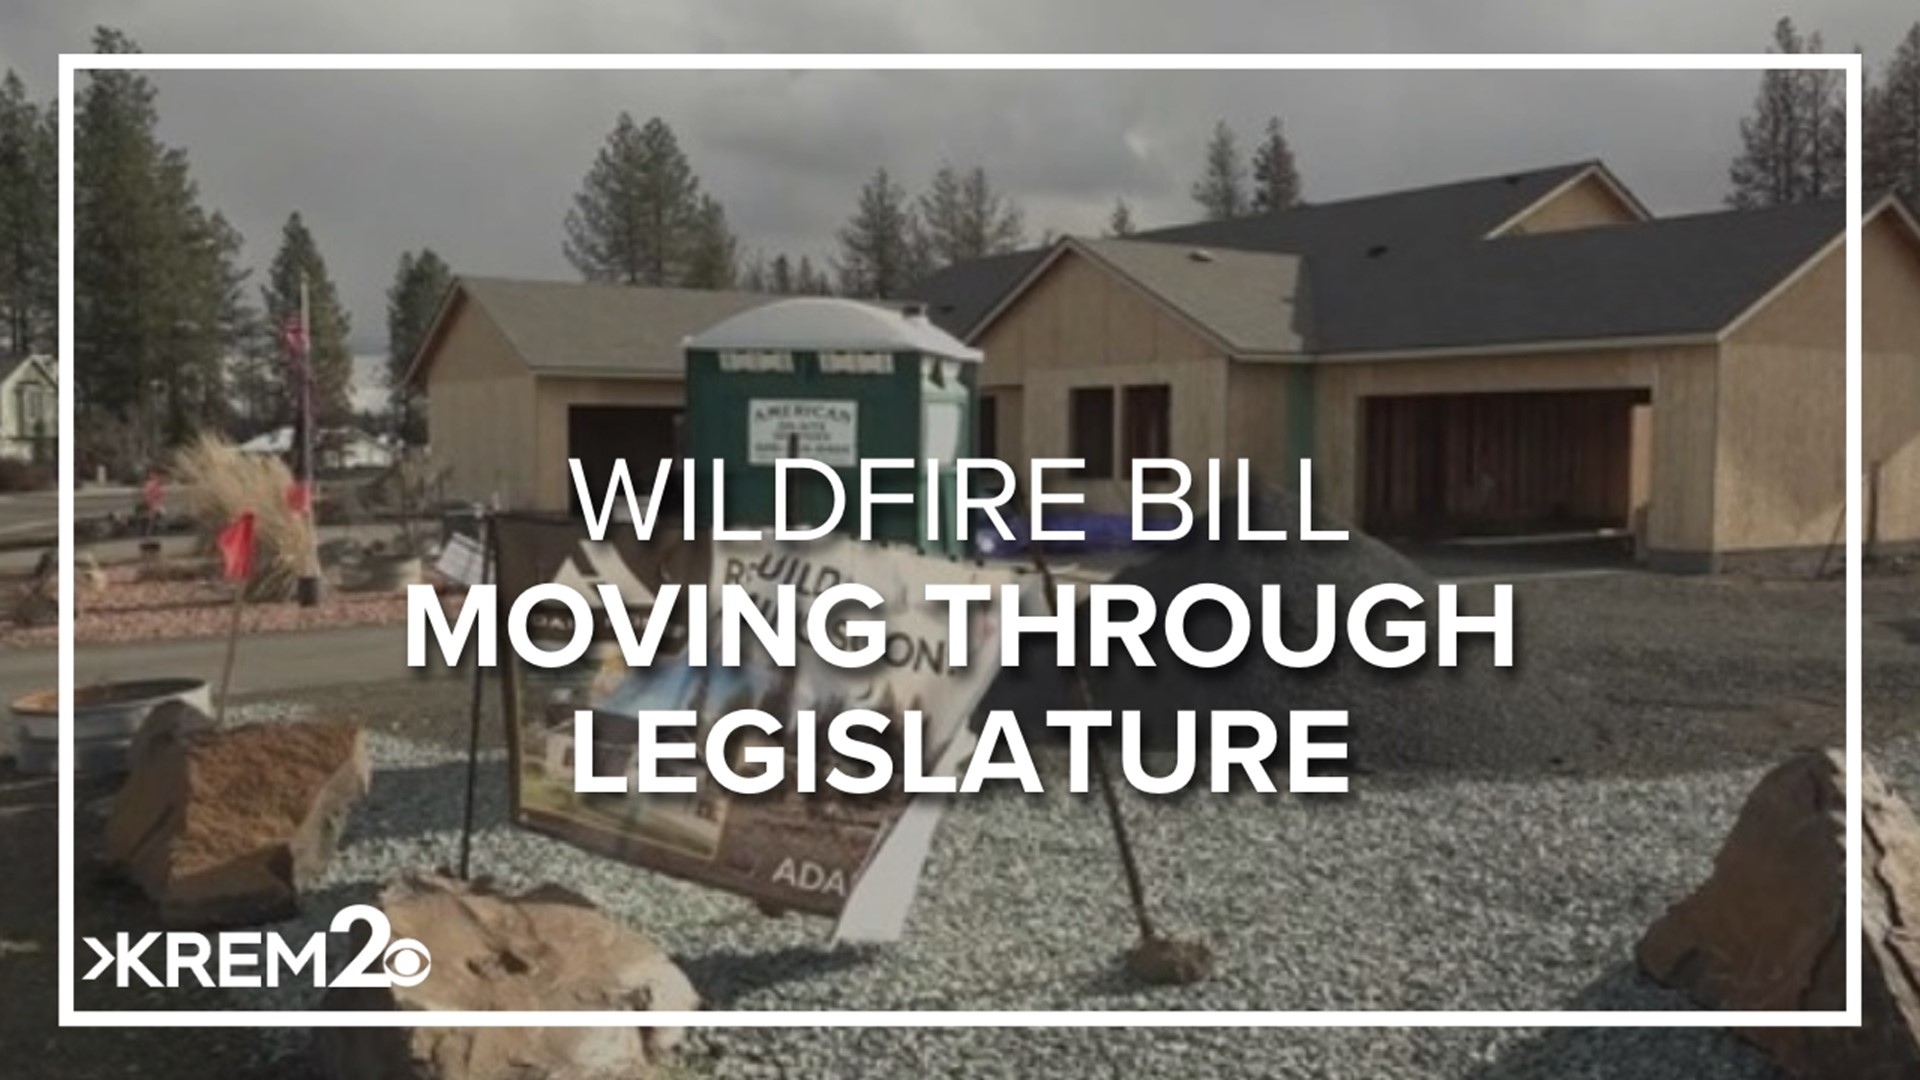 Substitute House Bill 1899 would establish a program to provide funds to pay for some of the new energy code upgrades required for newly built homes.